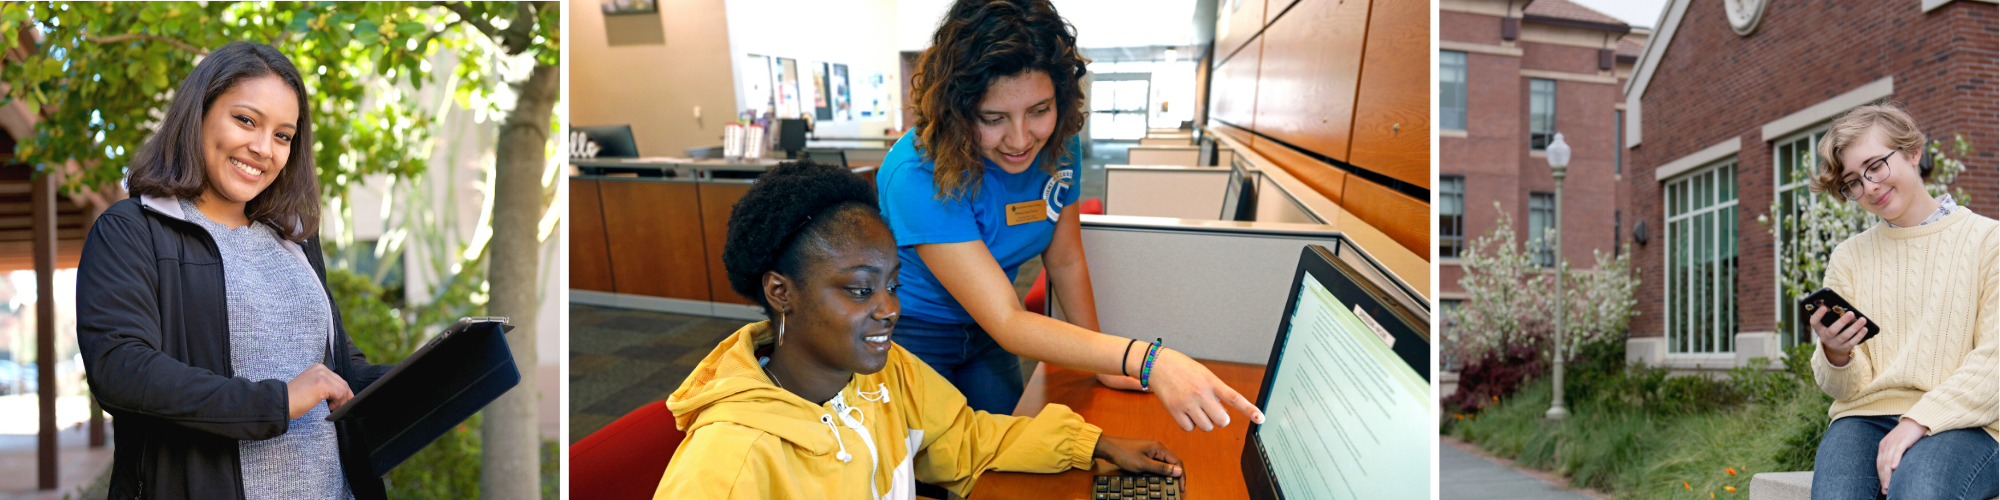 female student holding an ipad, first year peer coach helping a student on a computer, female student on cellphone outside of Bertolini